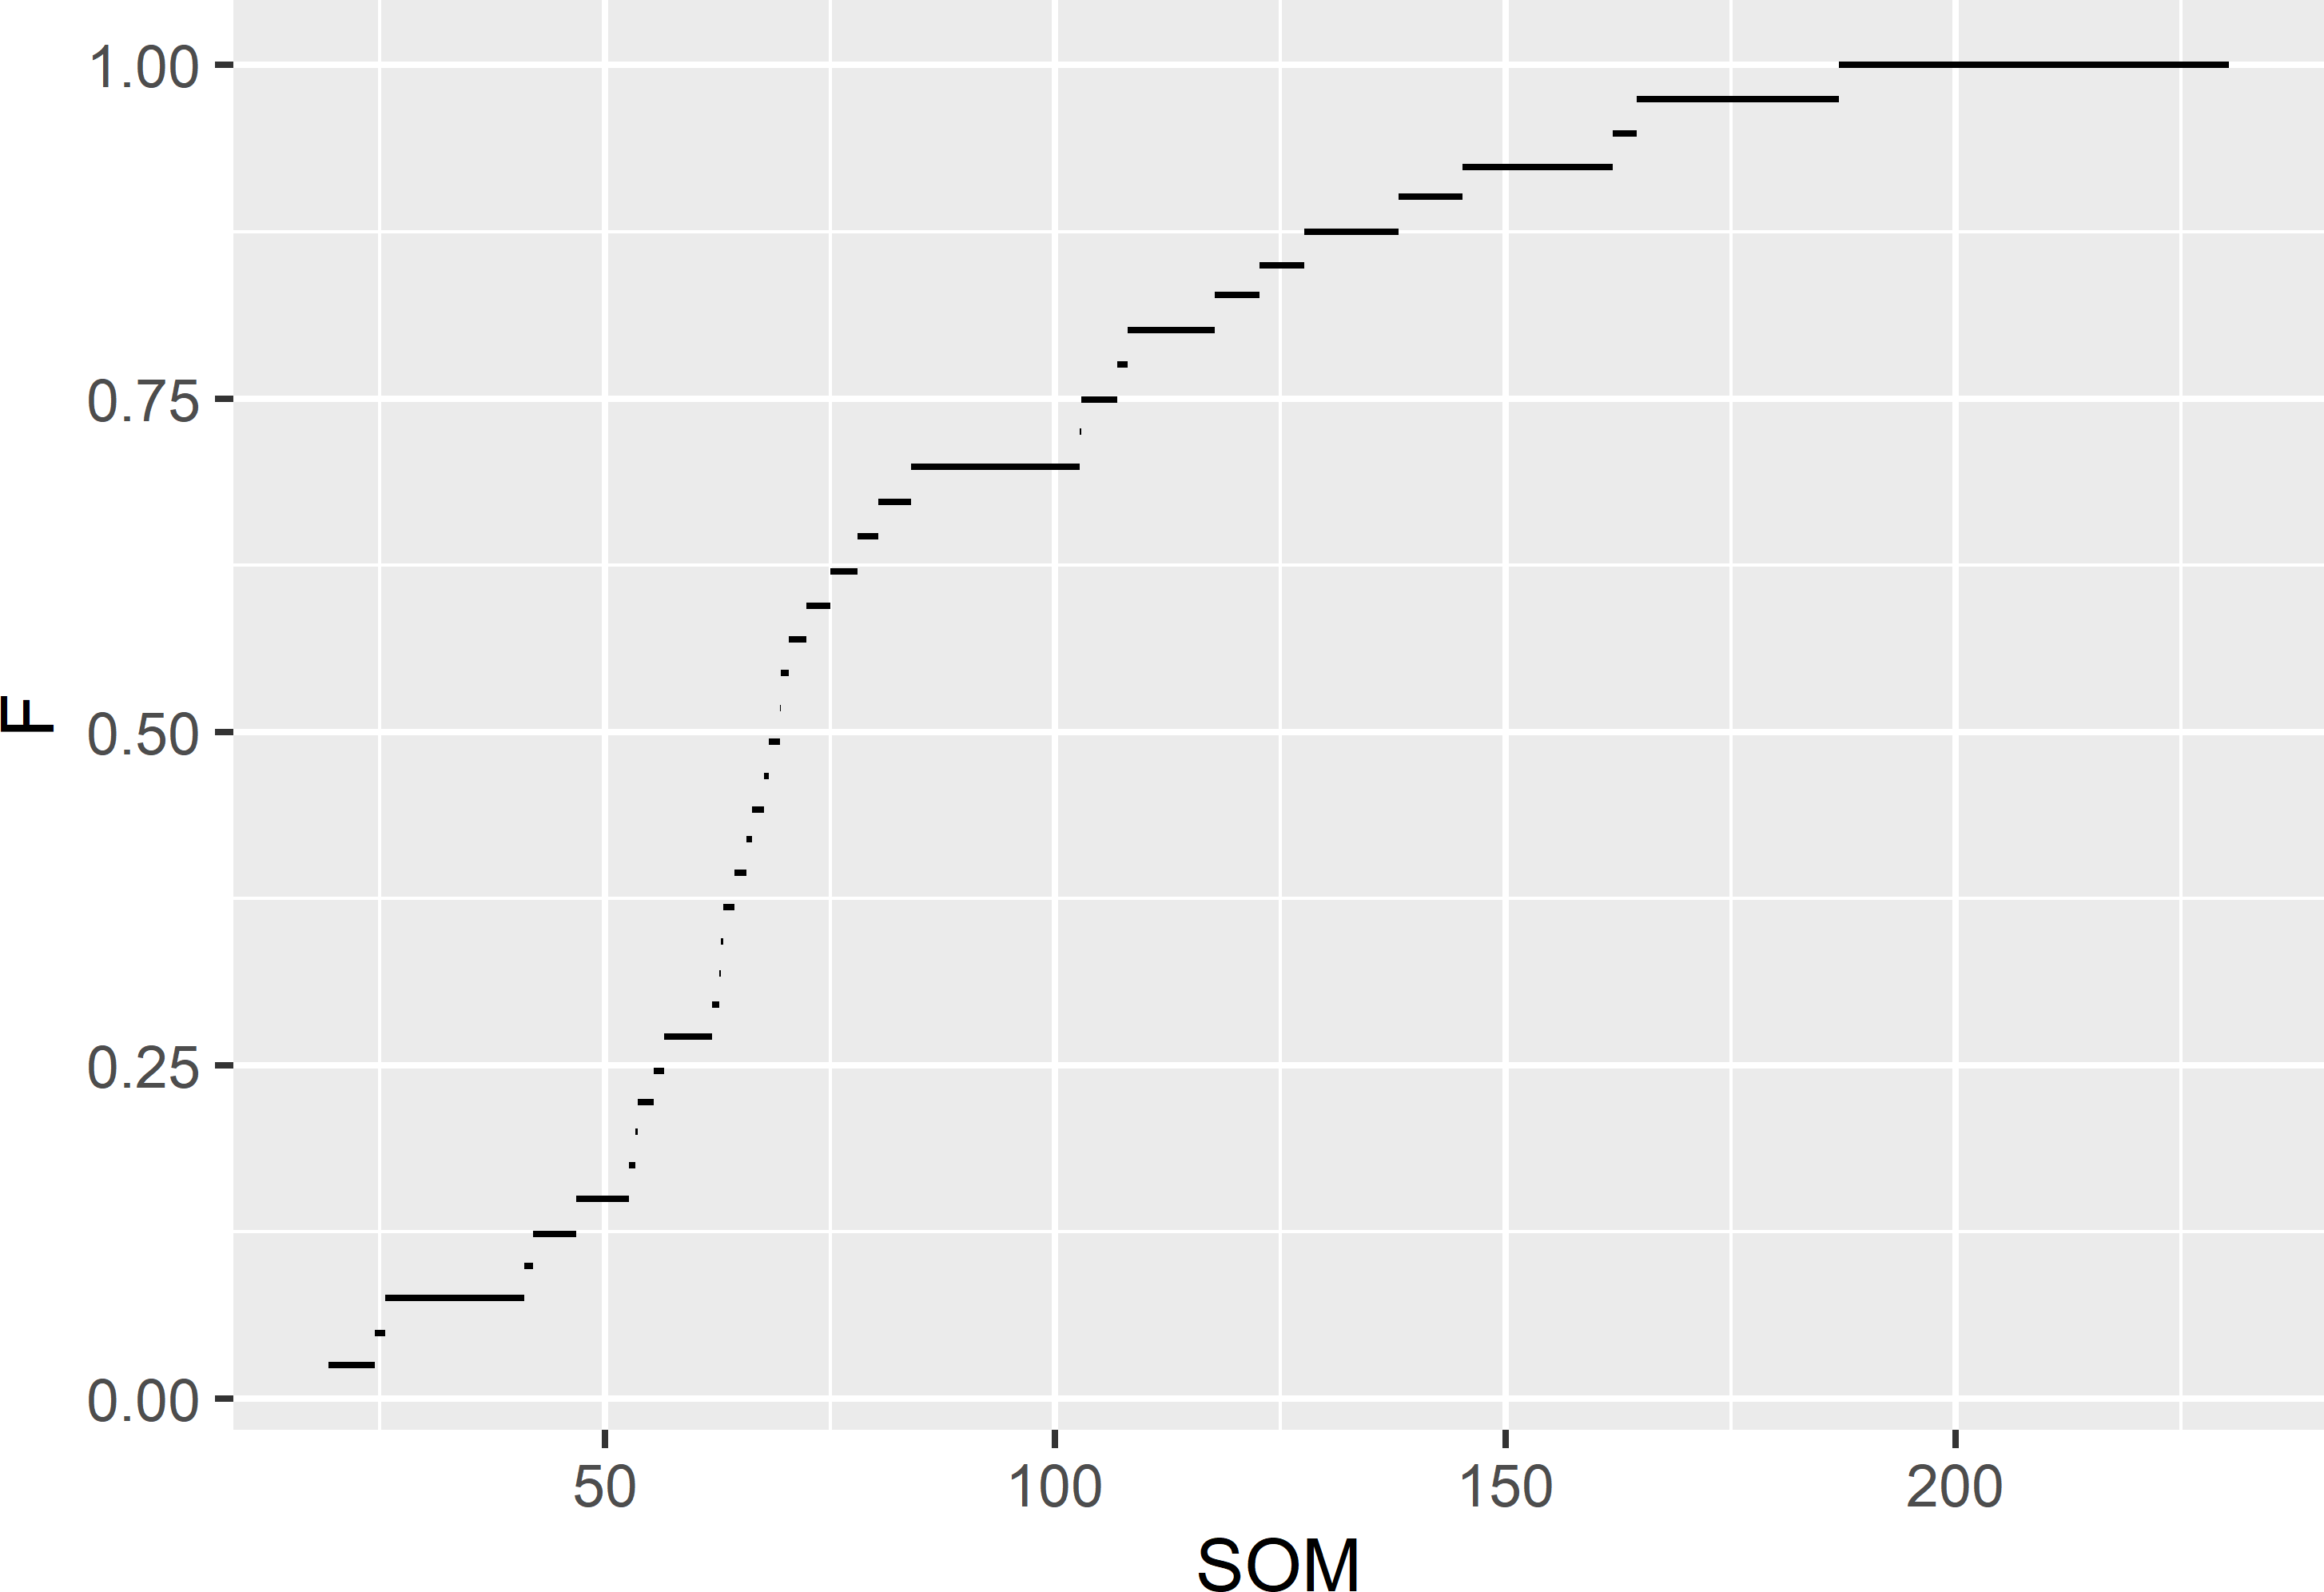 Estimated cumulative distribution function of the SOM concentration (g kg-1) in Voorst, estimated from the stratified simple random sample of 40 units.